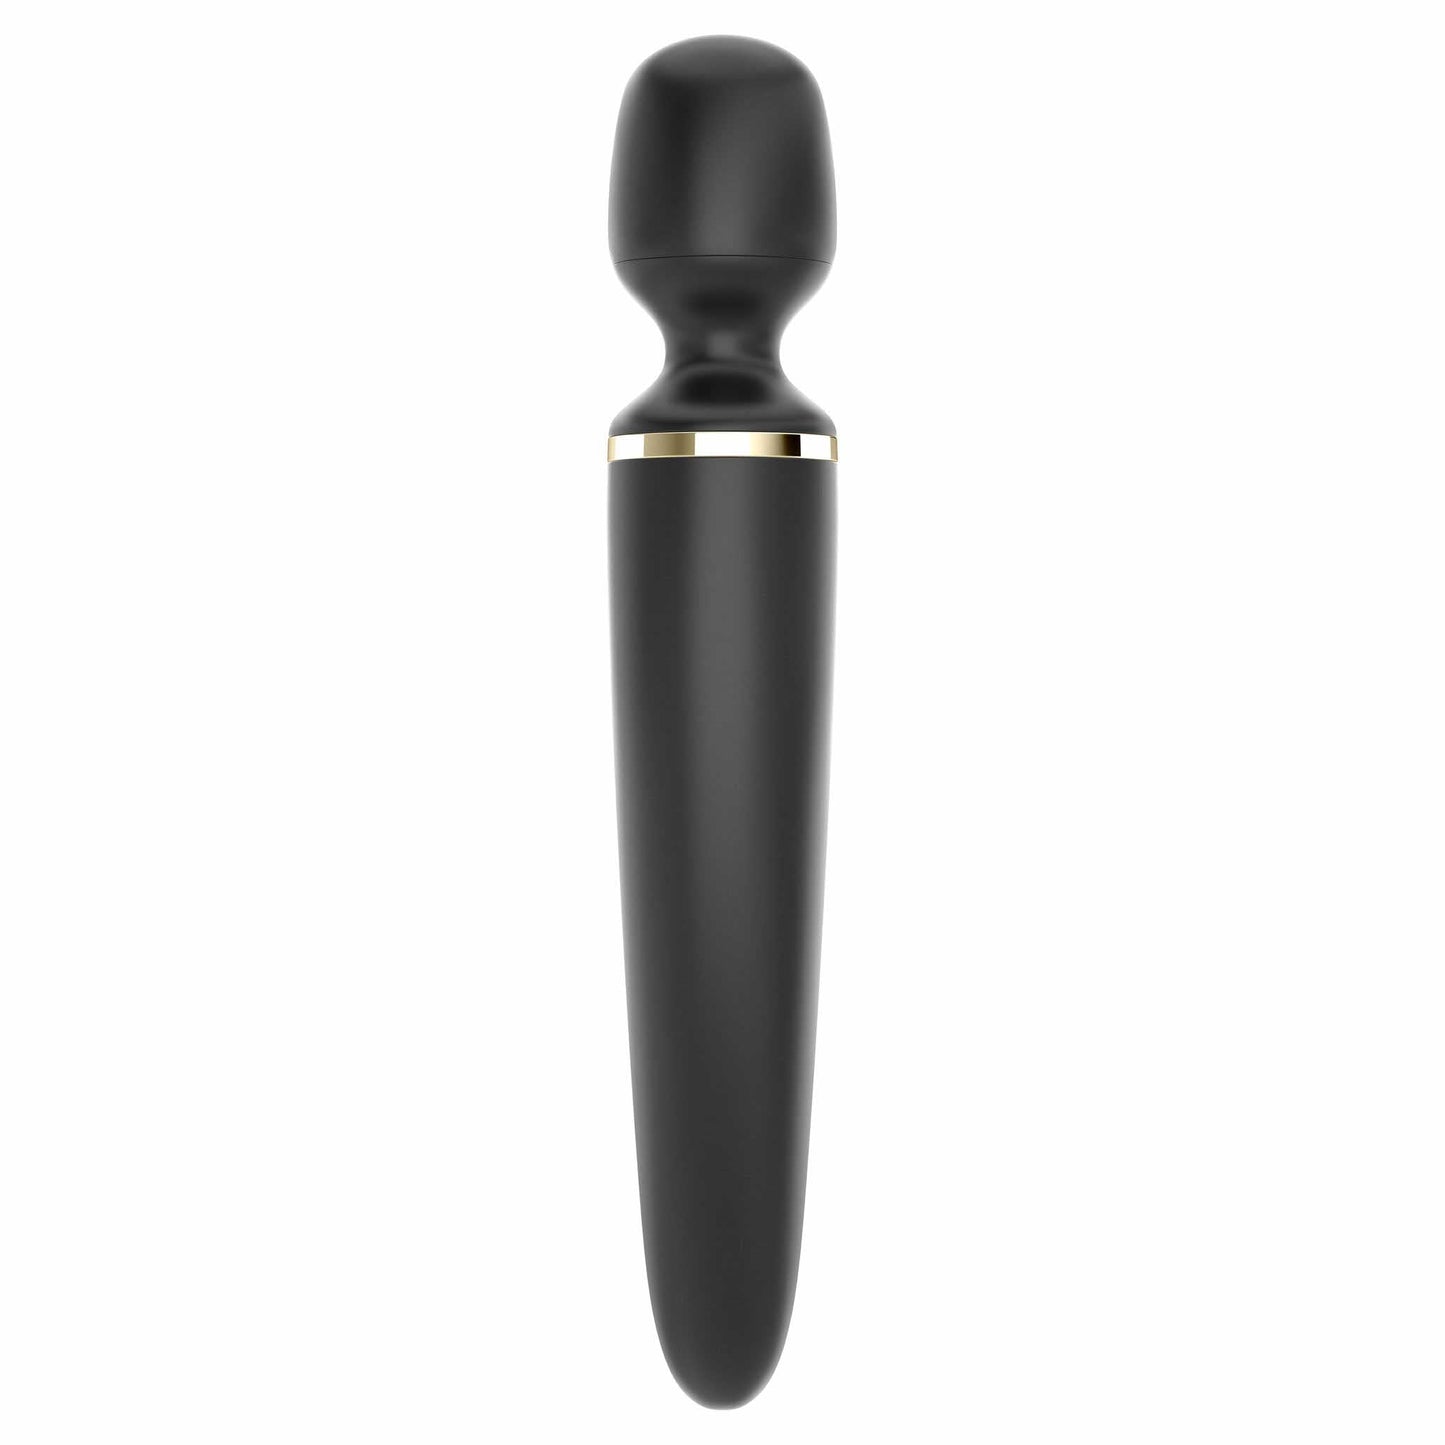 back view of the satisfyer wand-er woman vibrator eis059 black